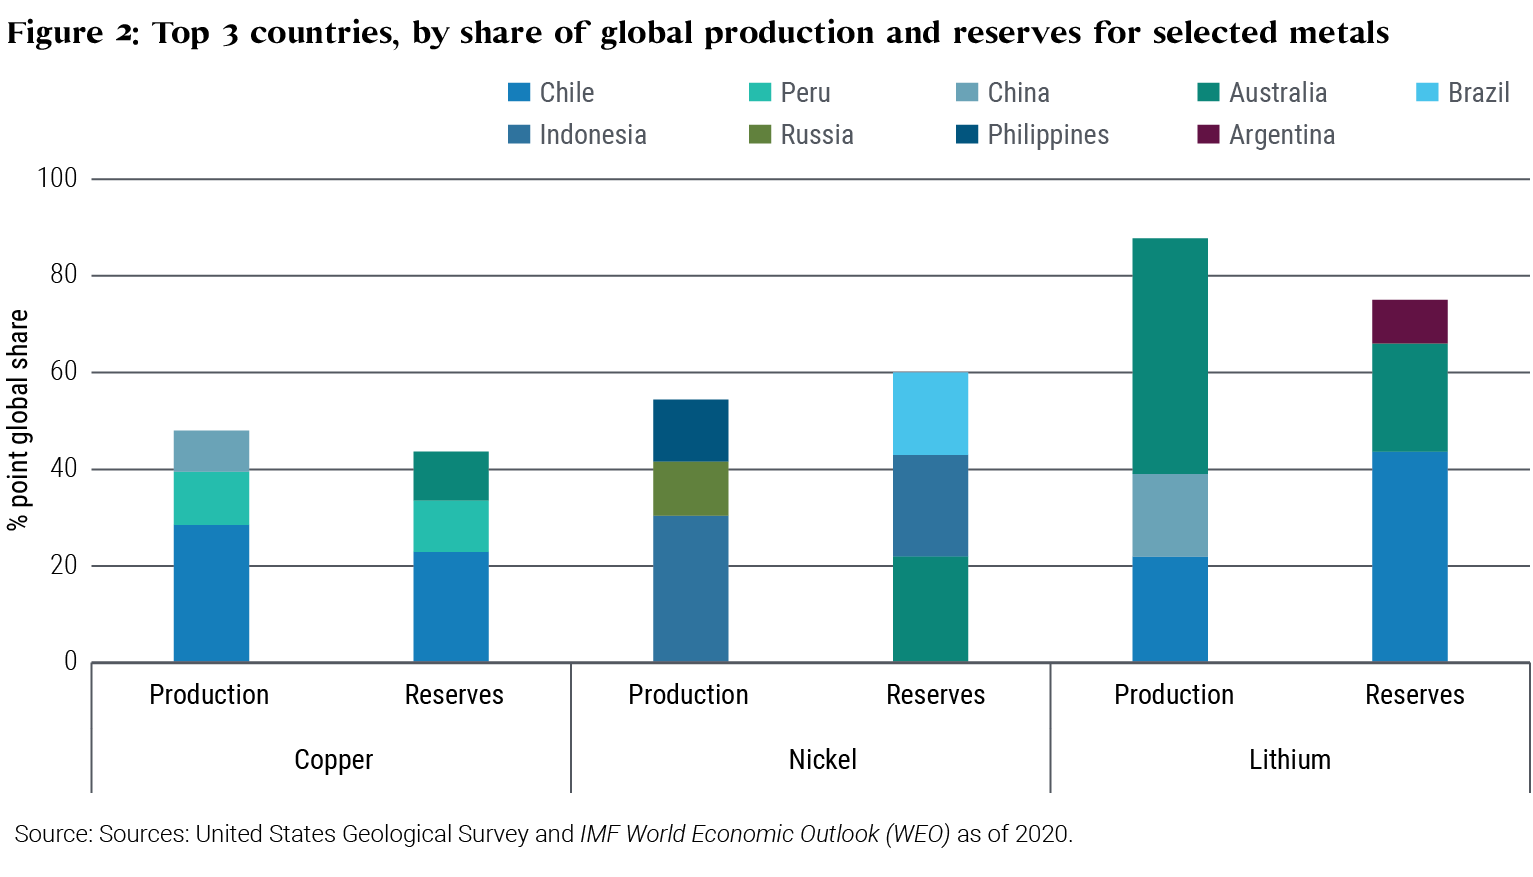 This bar chart shows the production and reserves of copper, nickel, and lithium by country as of 2020. For copper, Chile is the largest producer and has the highest reserves. For Nickel, Indonesia is the largest producer but has reserves on par with Australia and only slightly more than Brazil. For Lithium, Australia is by far the largest producer, but has roughly half the reserves of Chile.